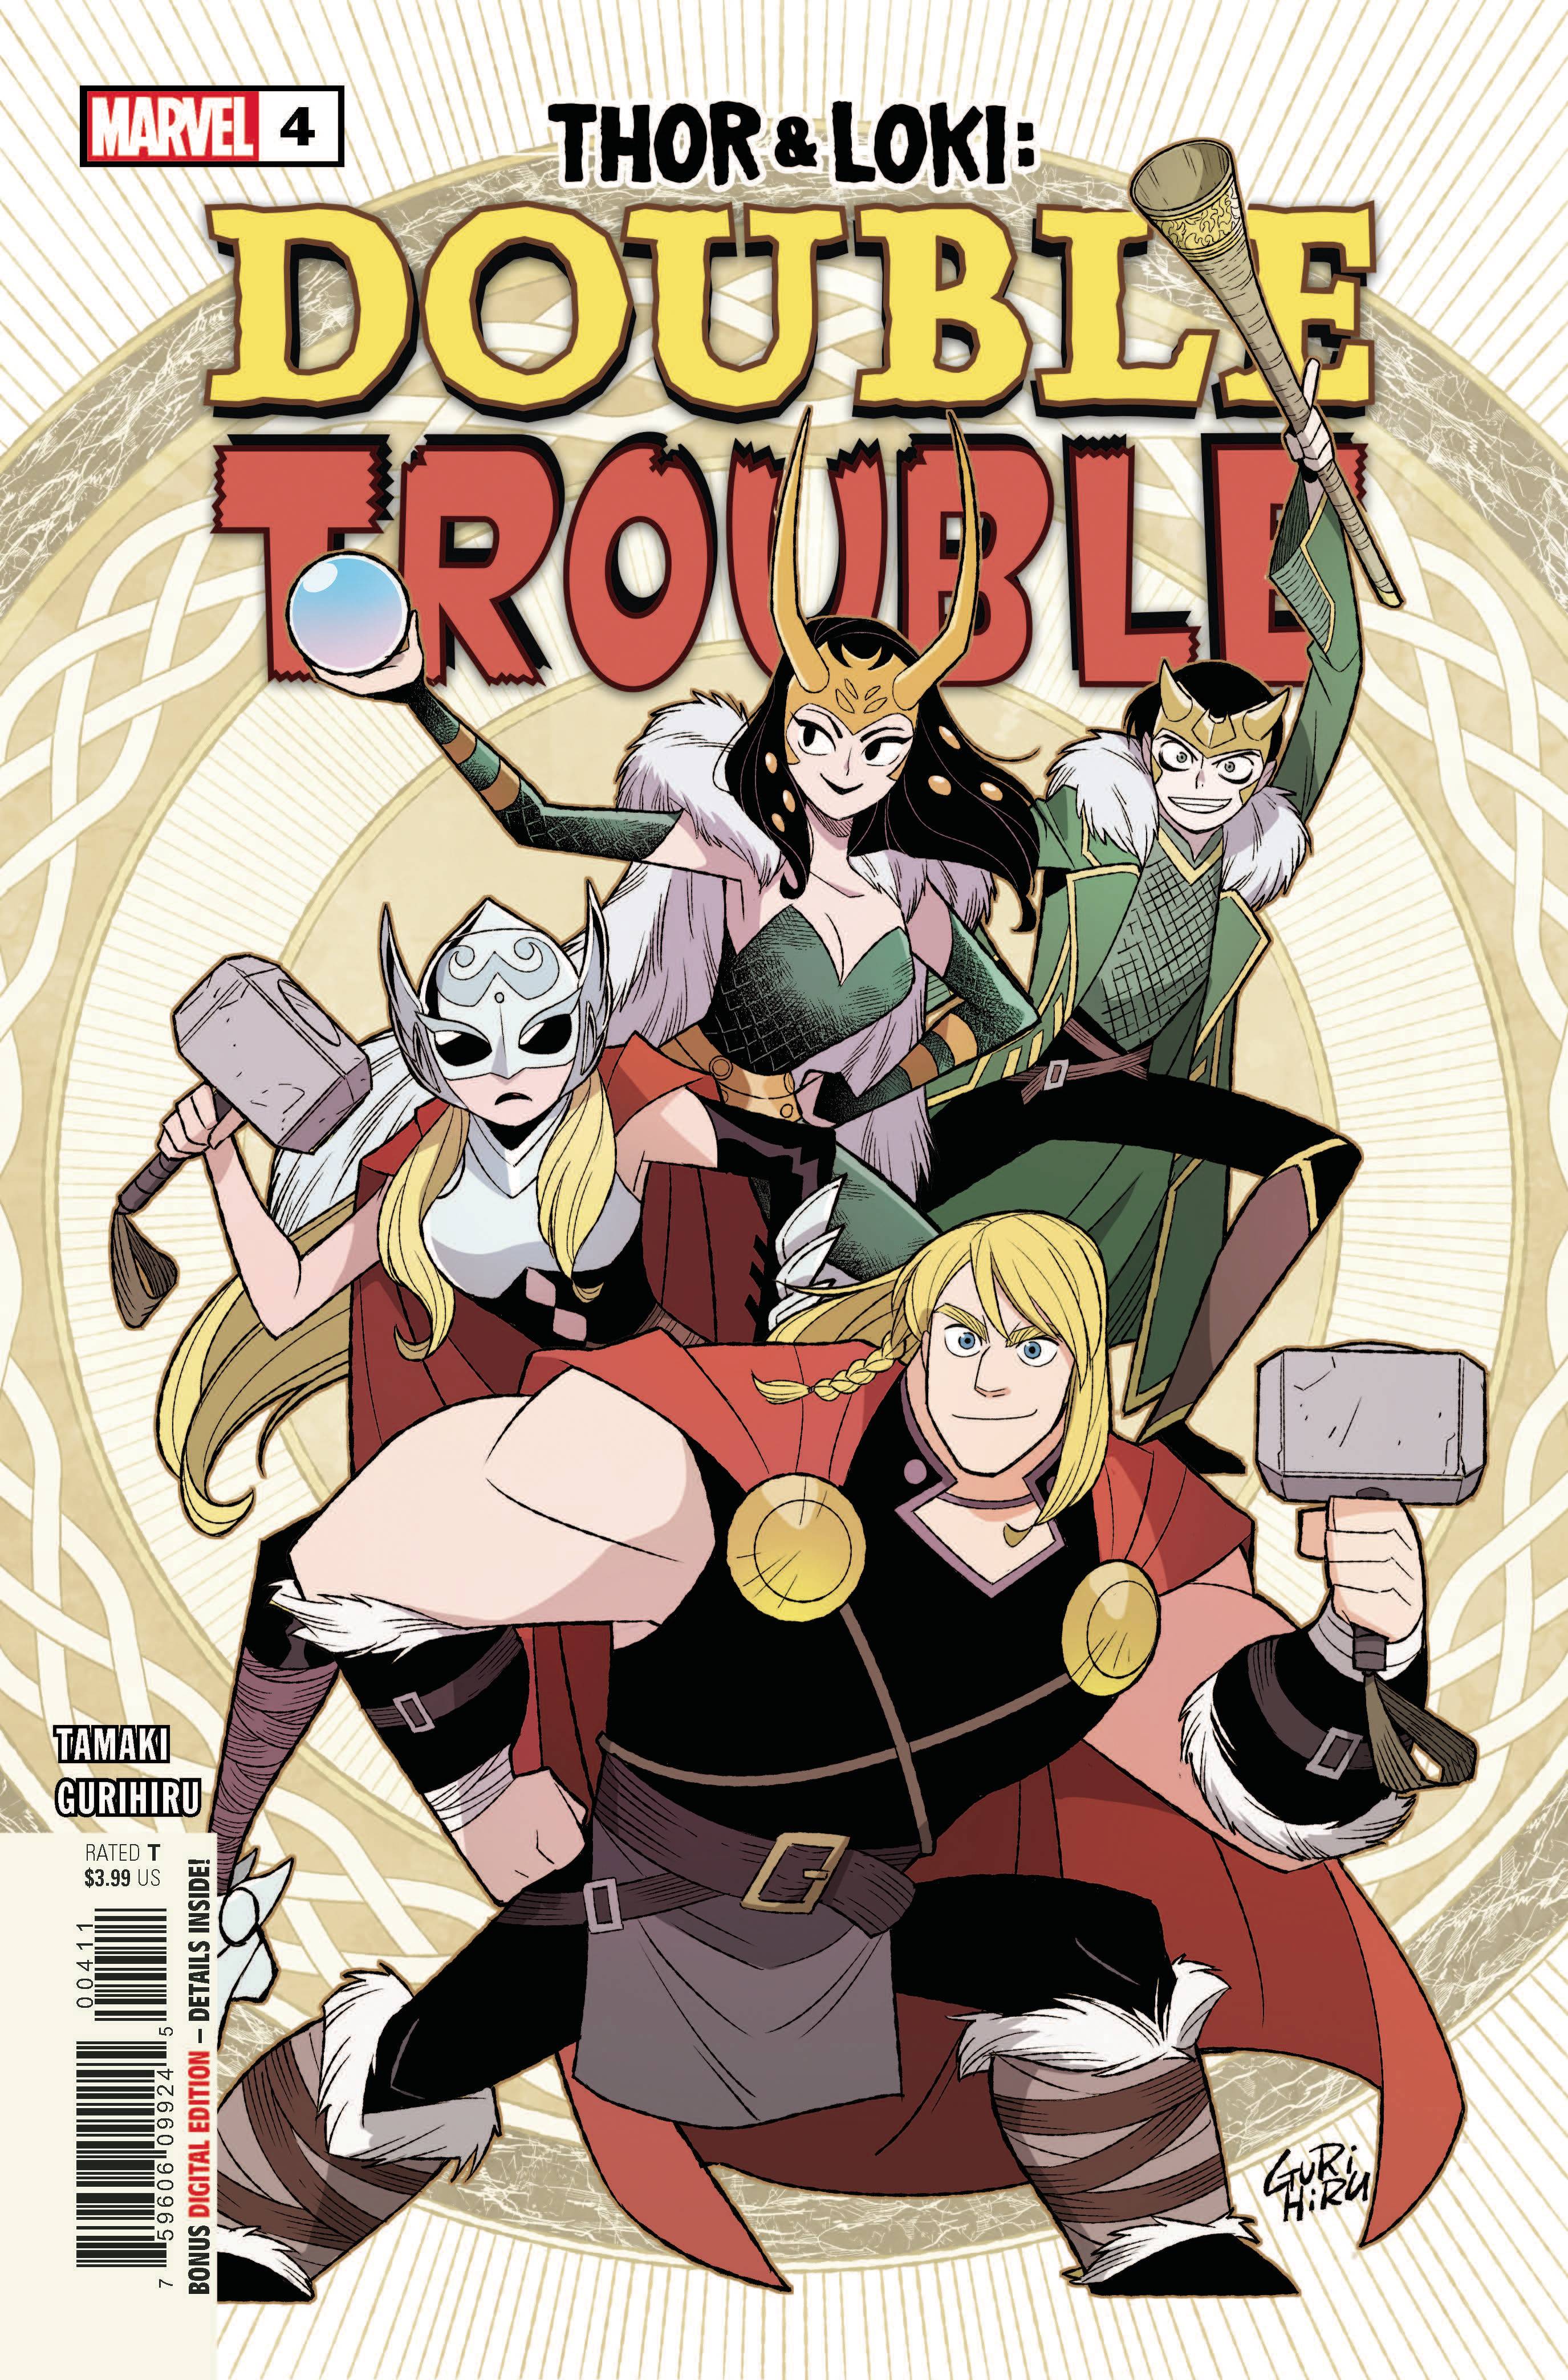 THOR AND LOKI DOUBLE TROUBLE #4 (OF 4)